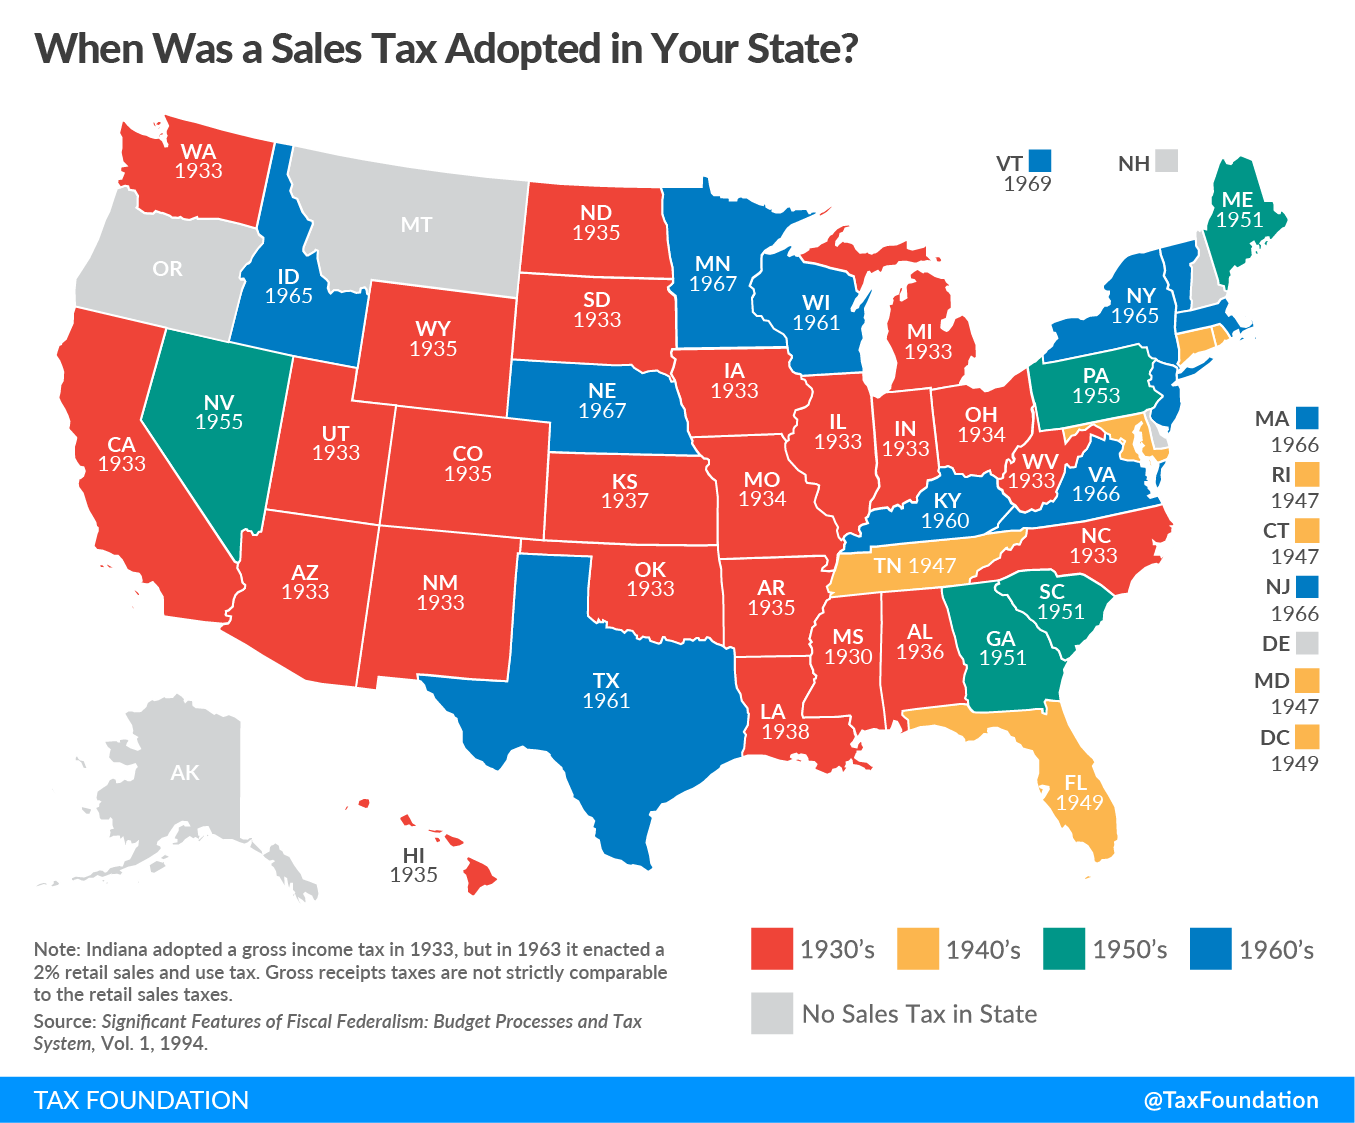 Sales Tax Adoption by State